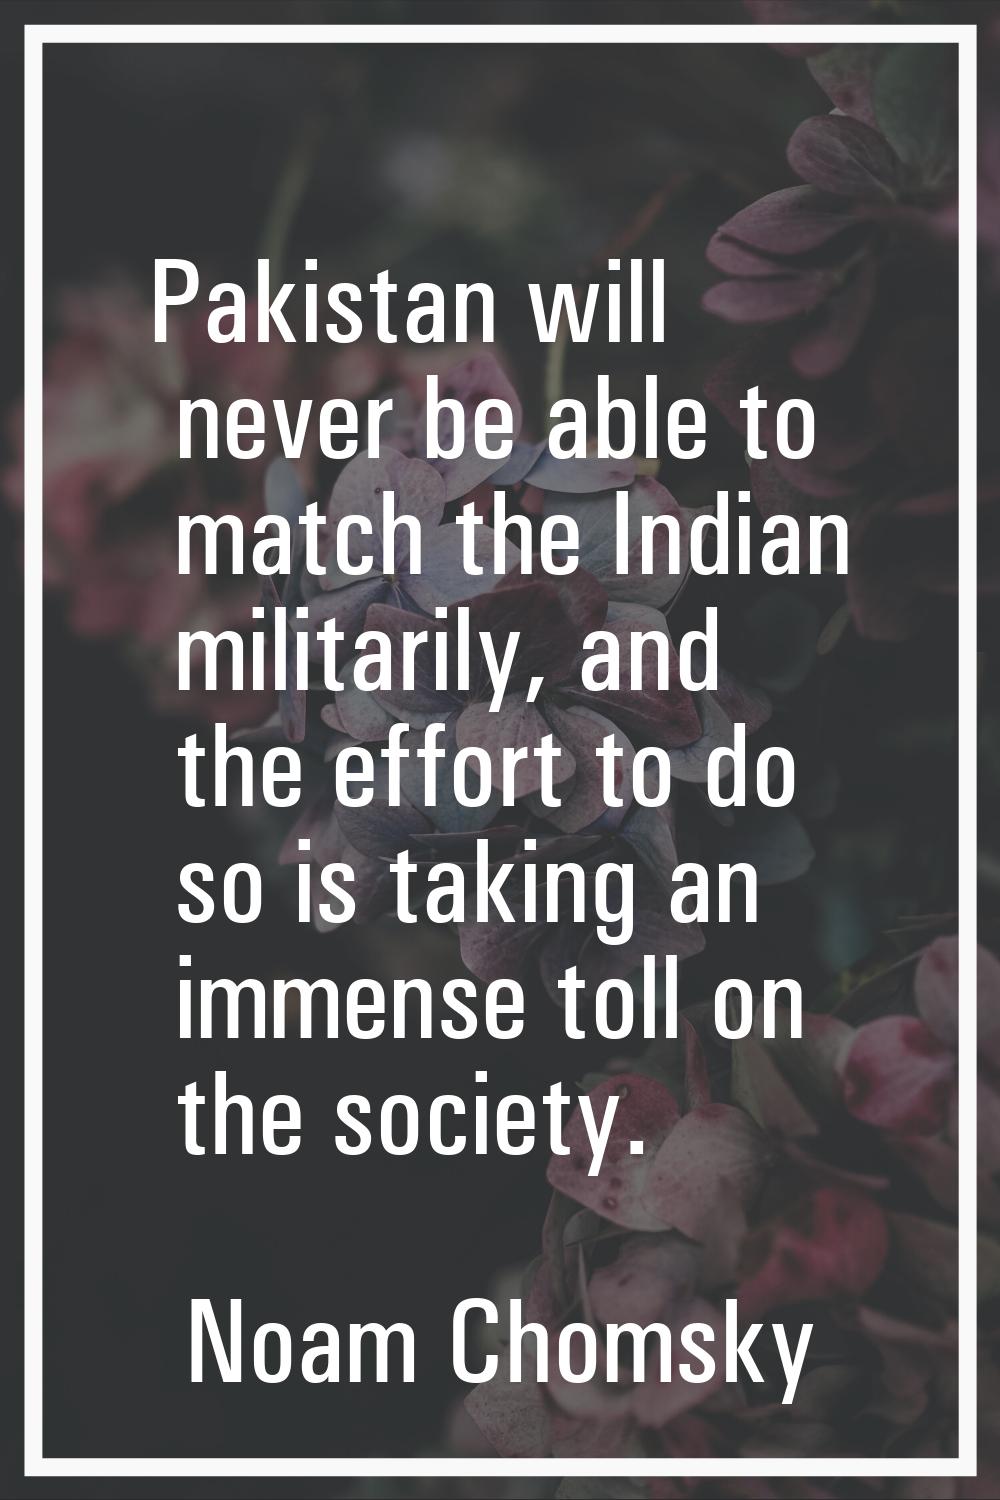 Pakistan will never be able to match the Indian militarily, and the effort to do so is taking an im